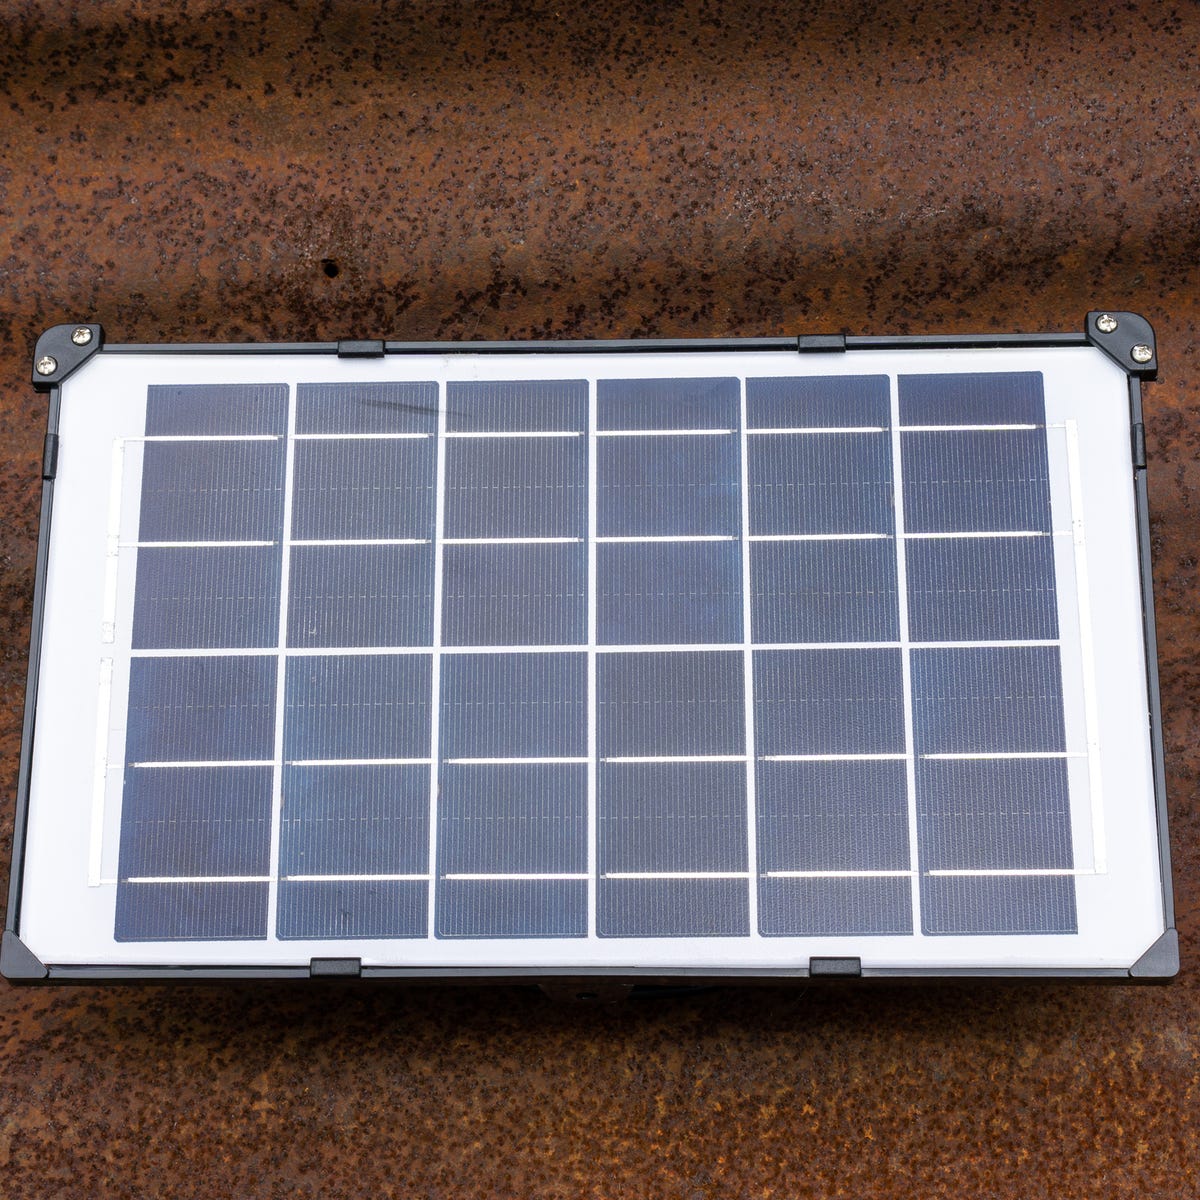 You Can Make Your Own Solar Panels, and It's Easier Than You'd